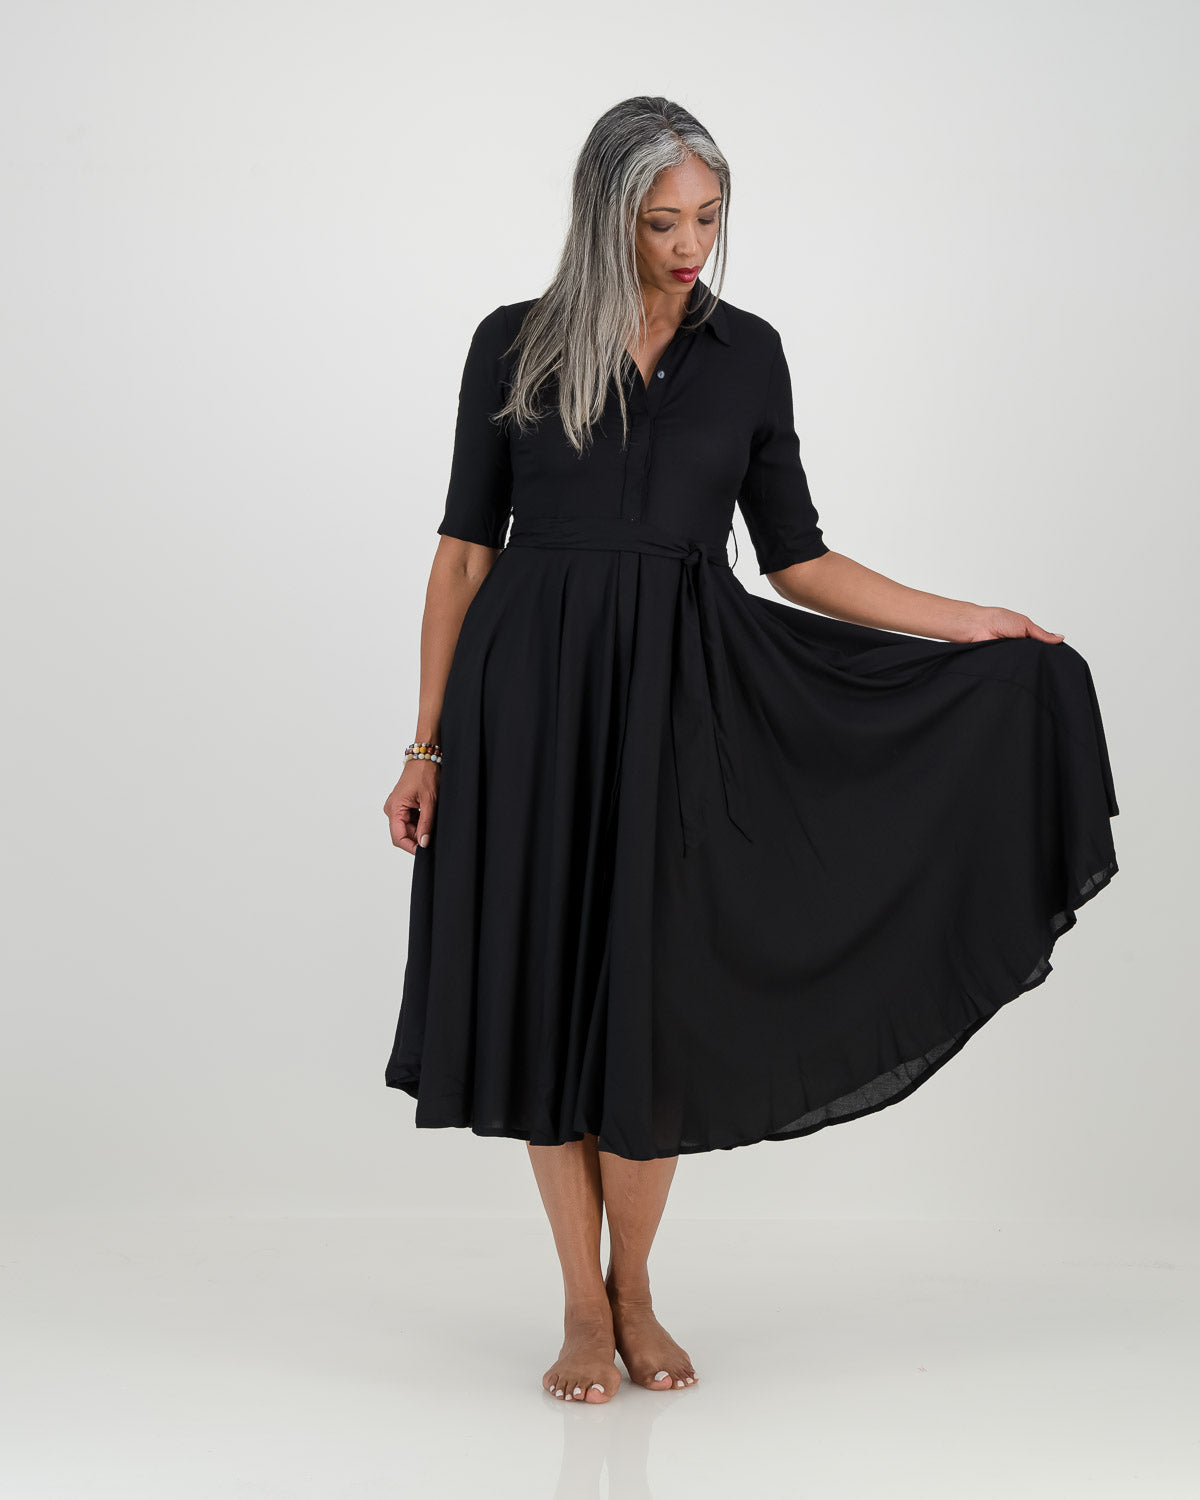 A woman in a black dress with 3/4 sleeves, collar, fitted waist, and full circle skirt. Versatile and elegant, perfect for any occasion!